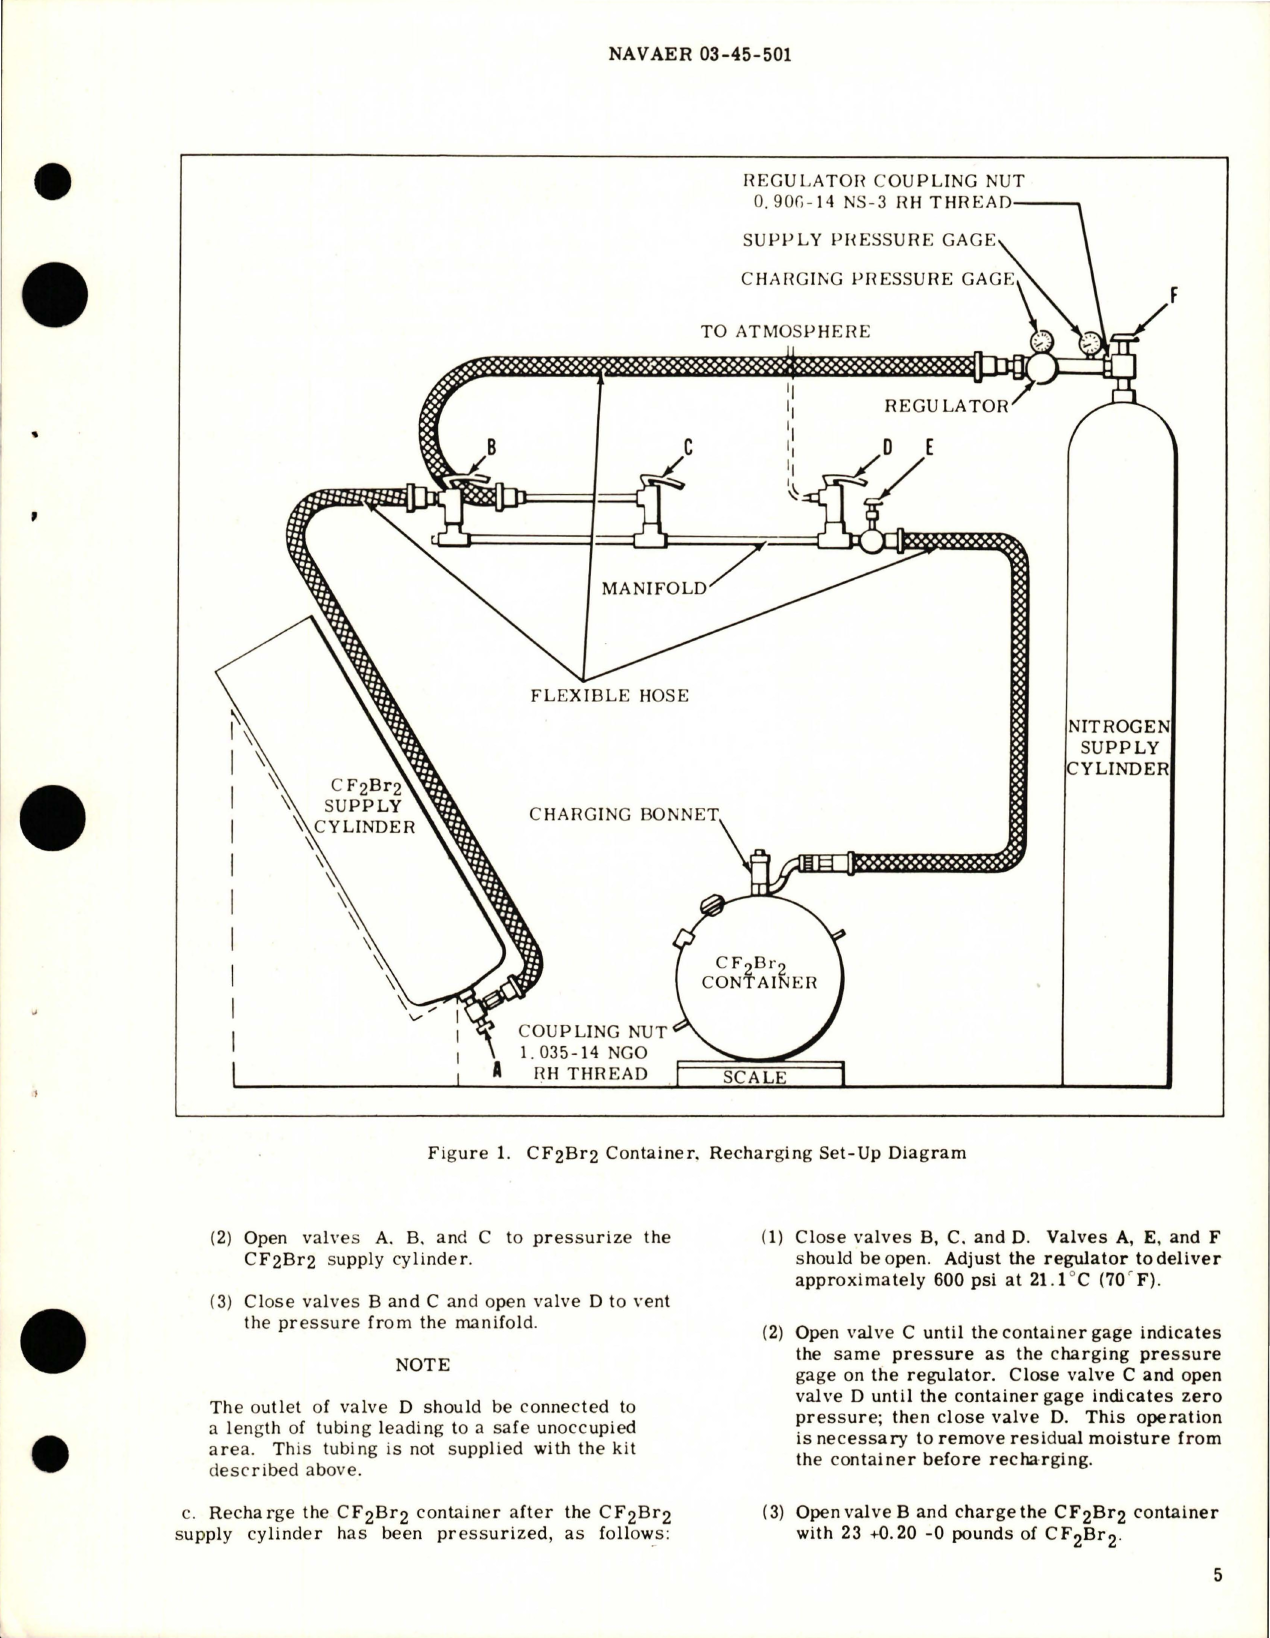 Sample page 5 from AirCorps Library document: Overhaul Instructions with Parts Breakdown for Liquid Agent Containers